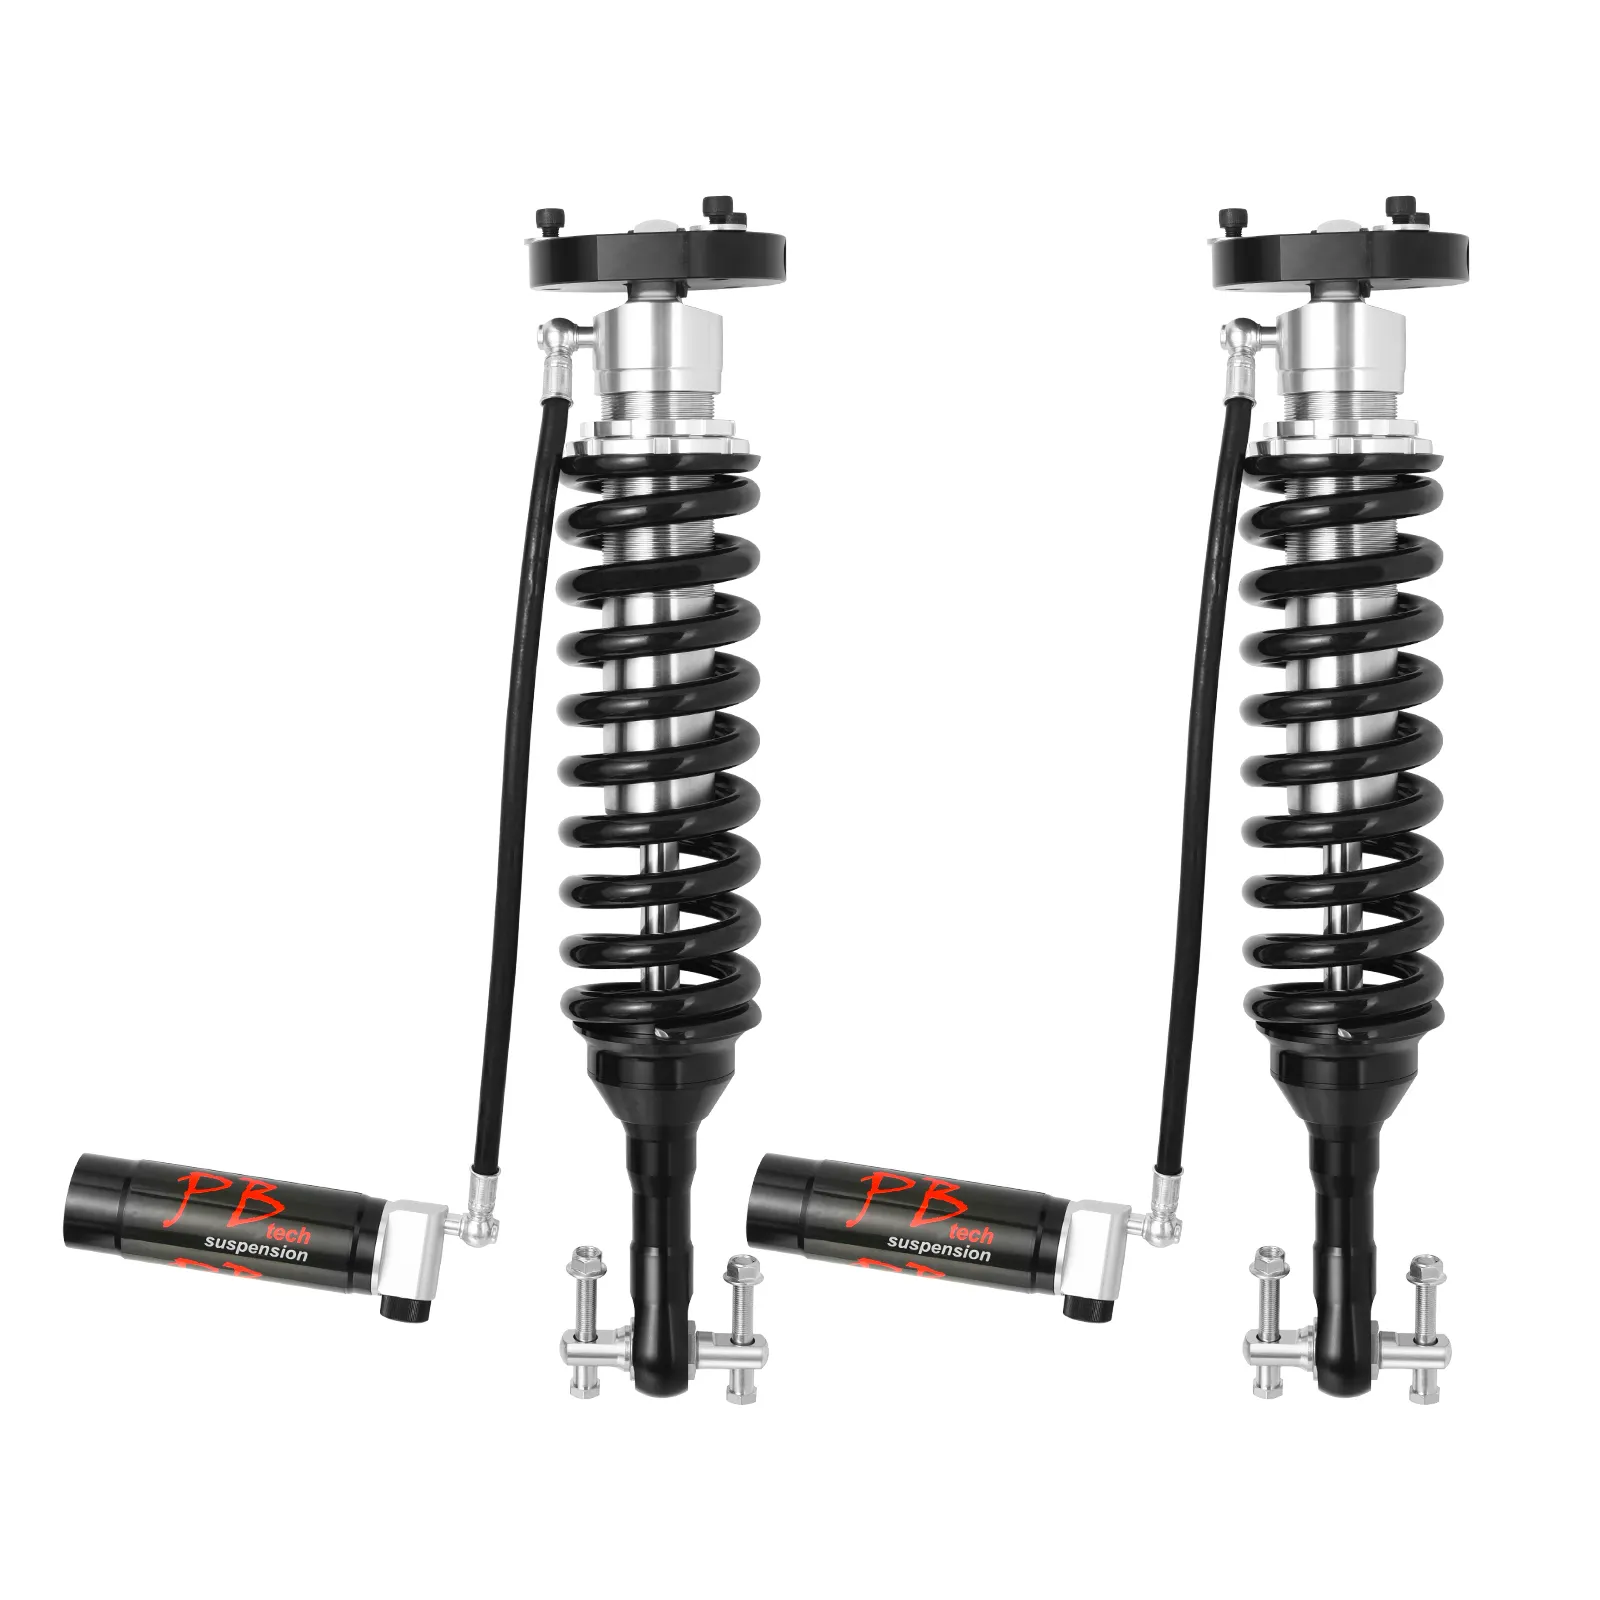 V.S.2.5 Front Shocks Absorber (0-3 Lift) Adjustable/21 Section For 2015-UP Ford F150 Suspension Coilover Kits Factory Price